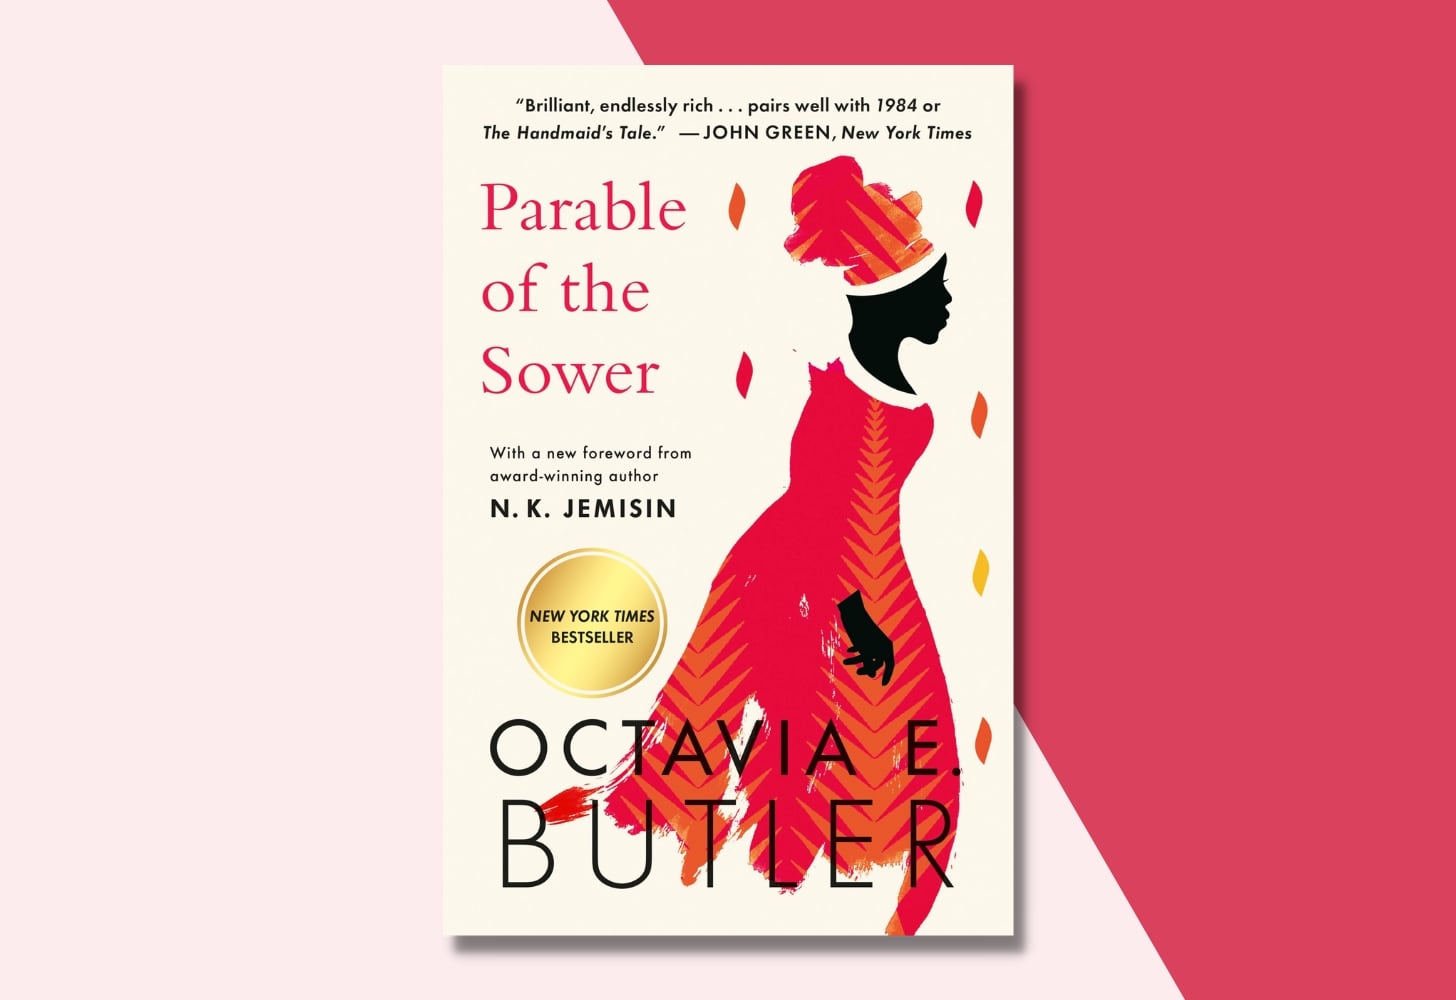 “Parable of the Sower” by Octavia Butler